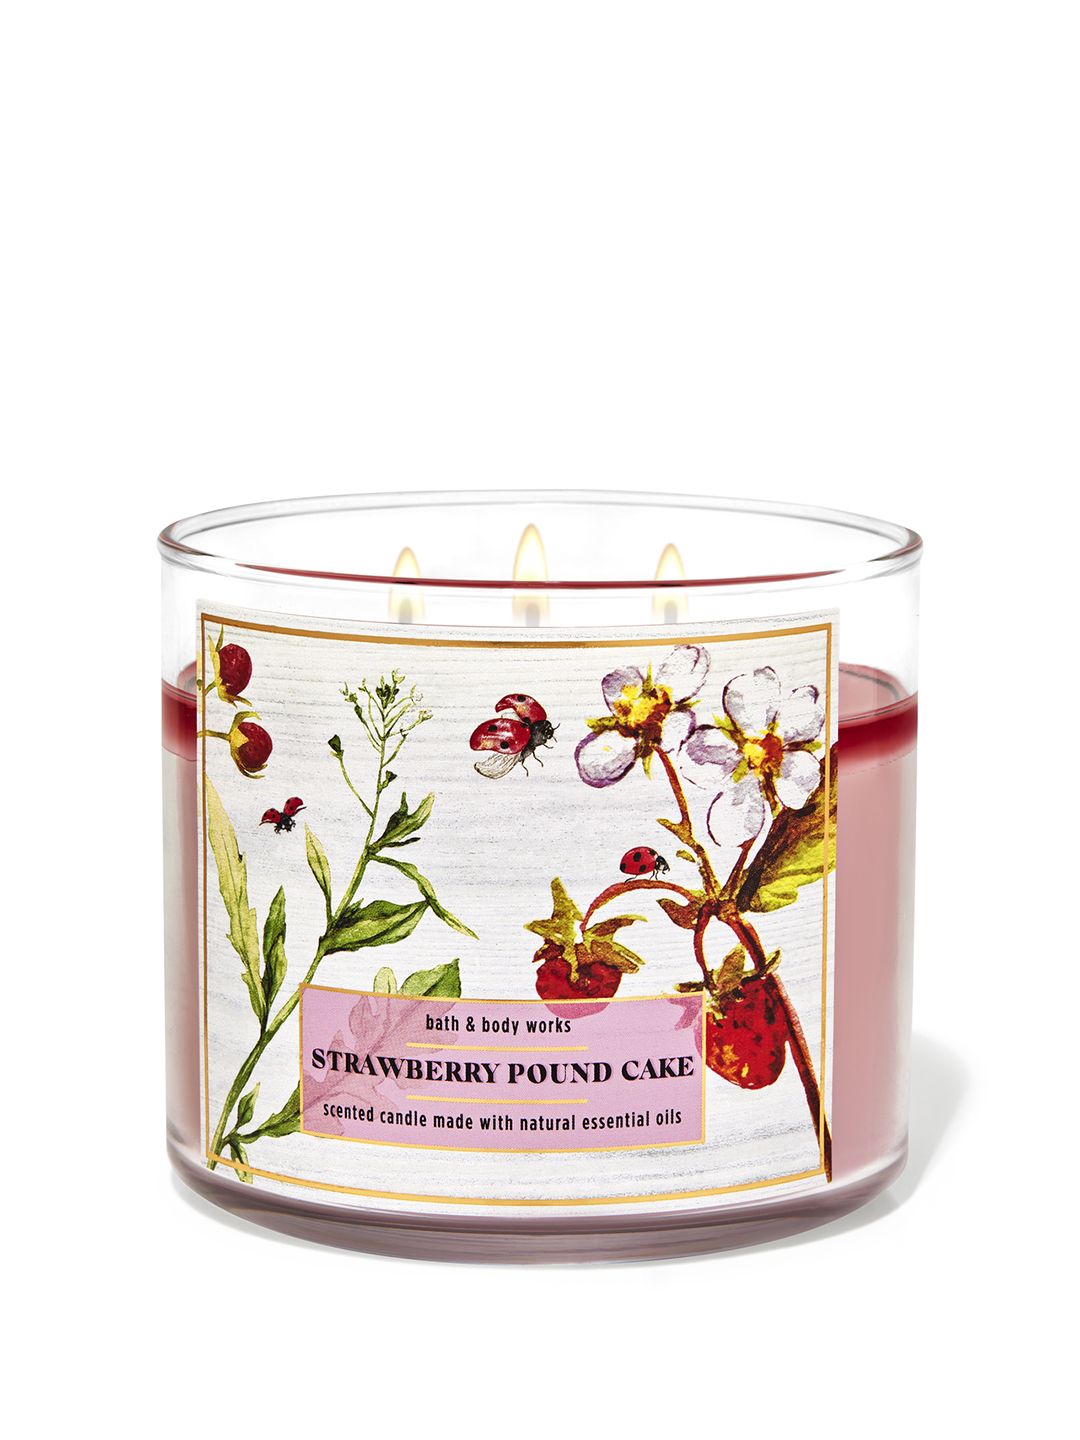 Bath & Body Works Strawberry Pound Cake 3-Wick Scented Candle with Essential Oils - 411 g Price in India